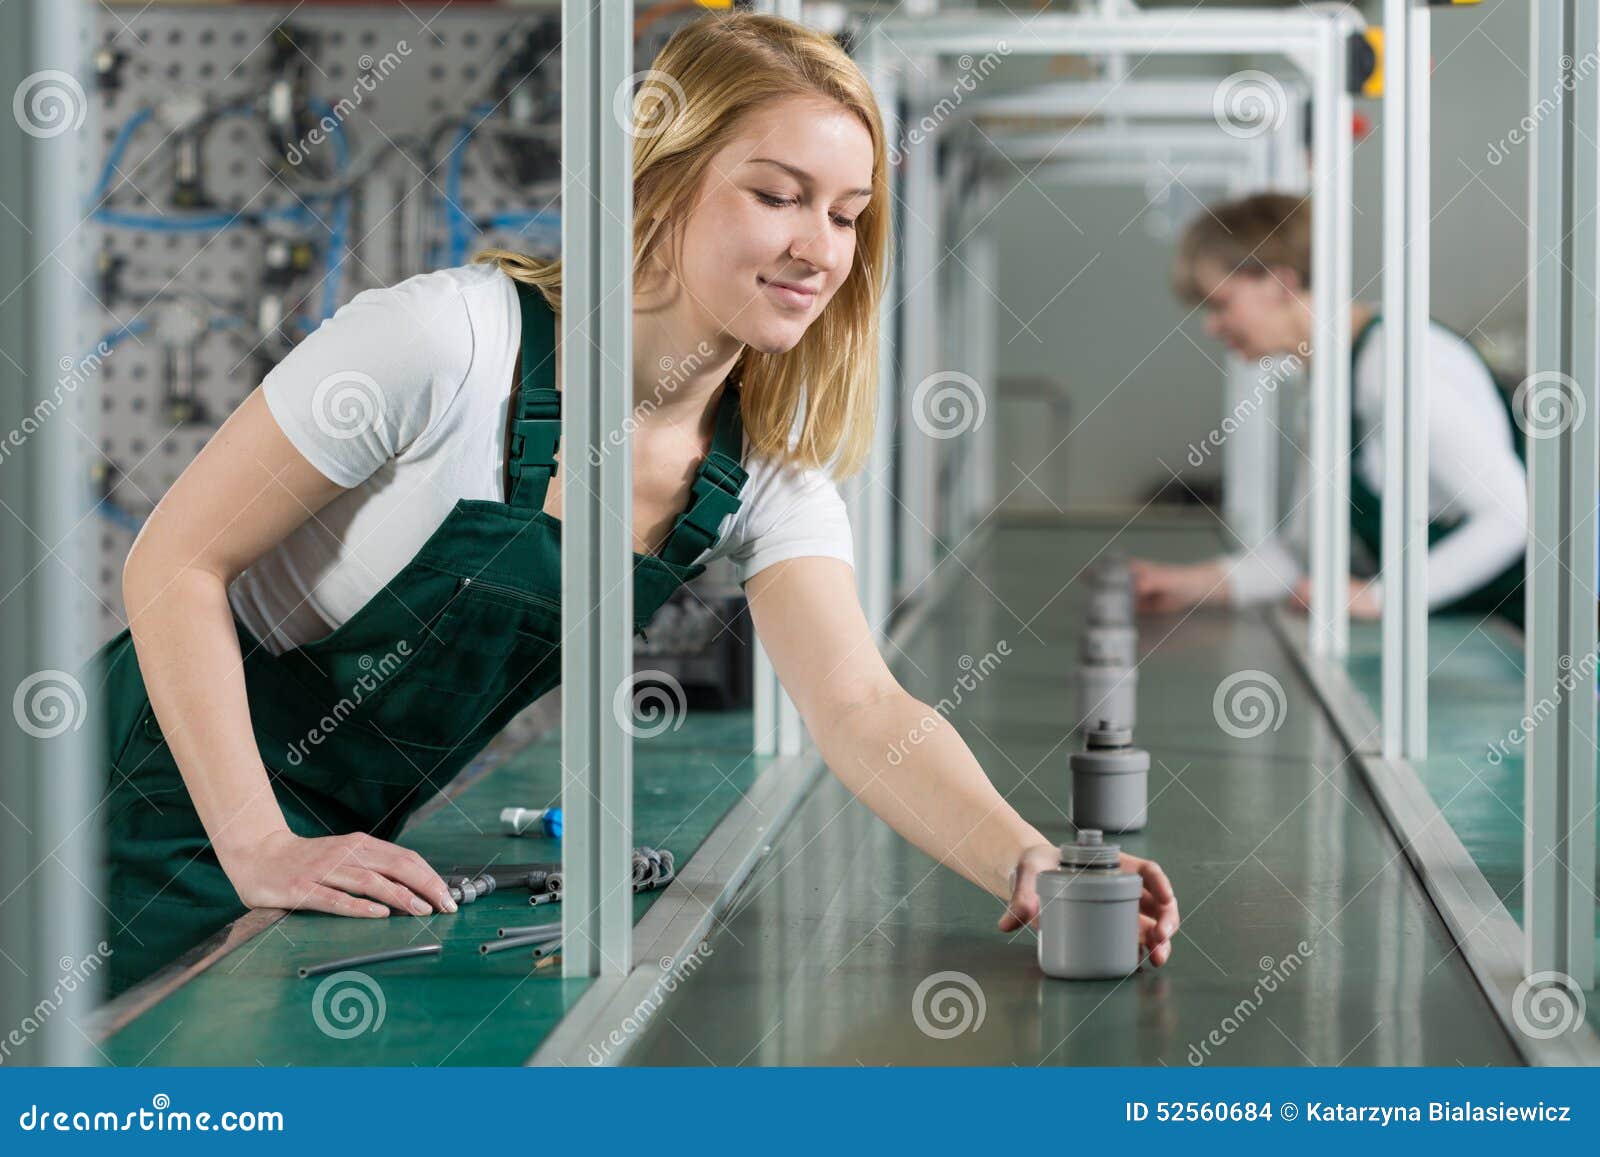 female assembly line workers